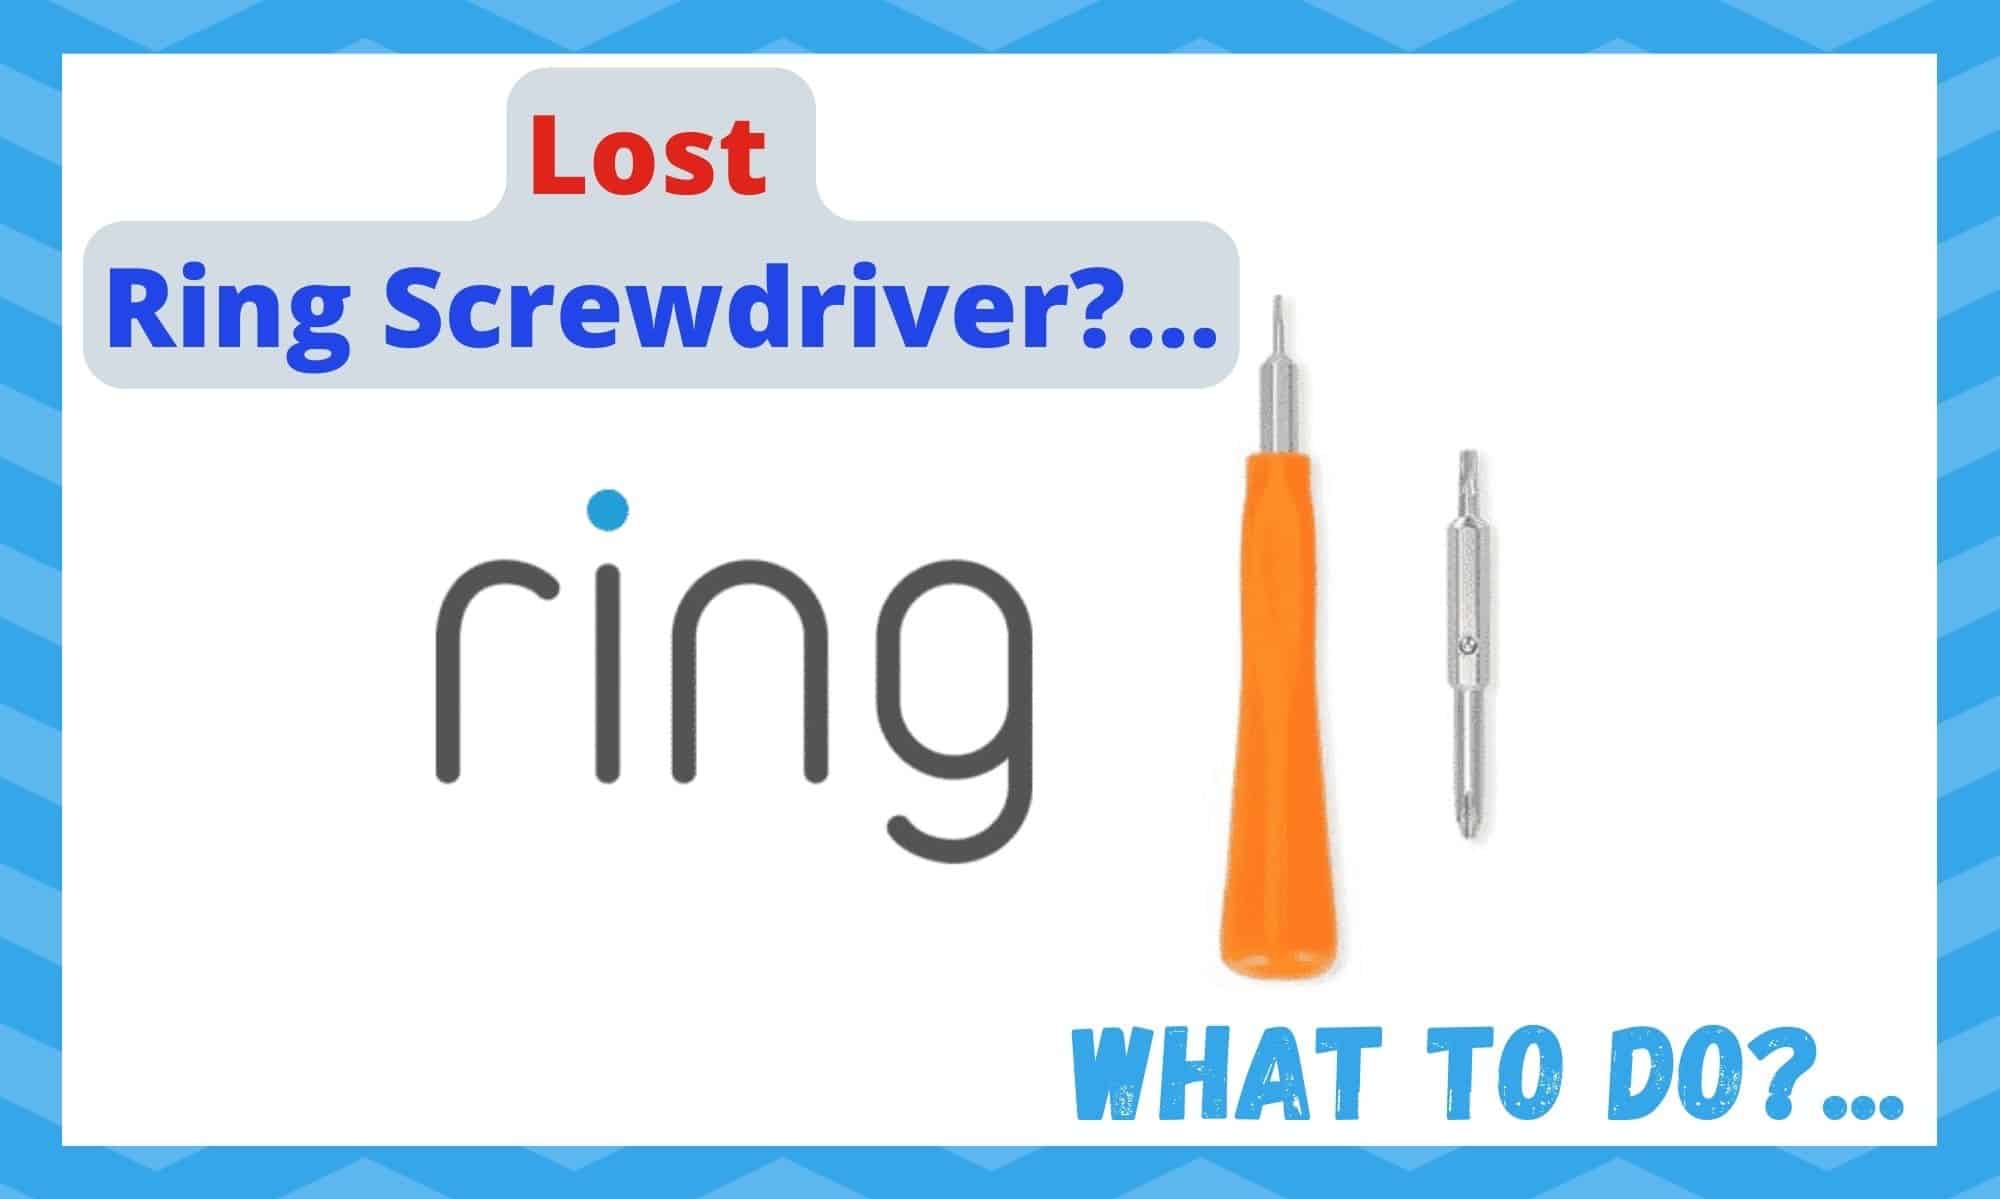 Lost Ring Screwdriver